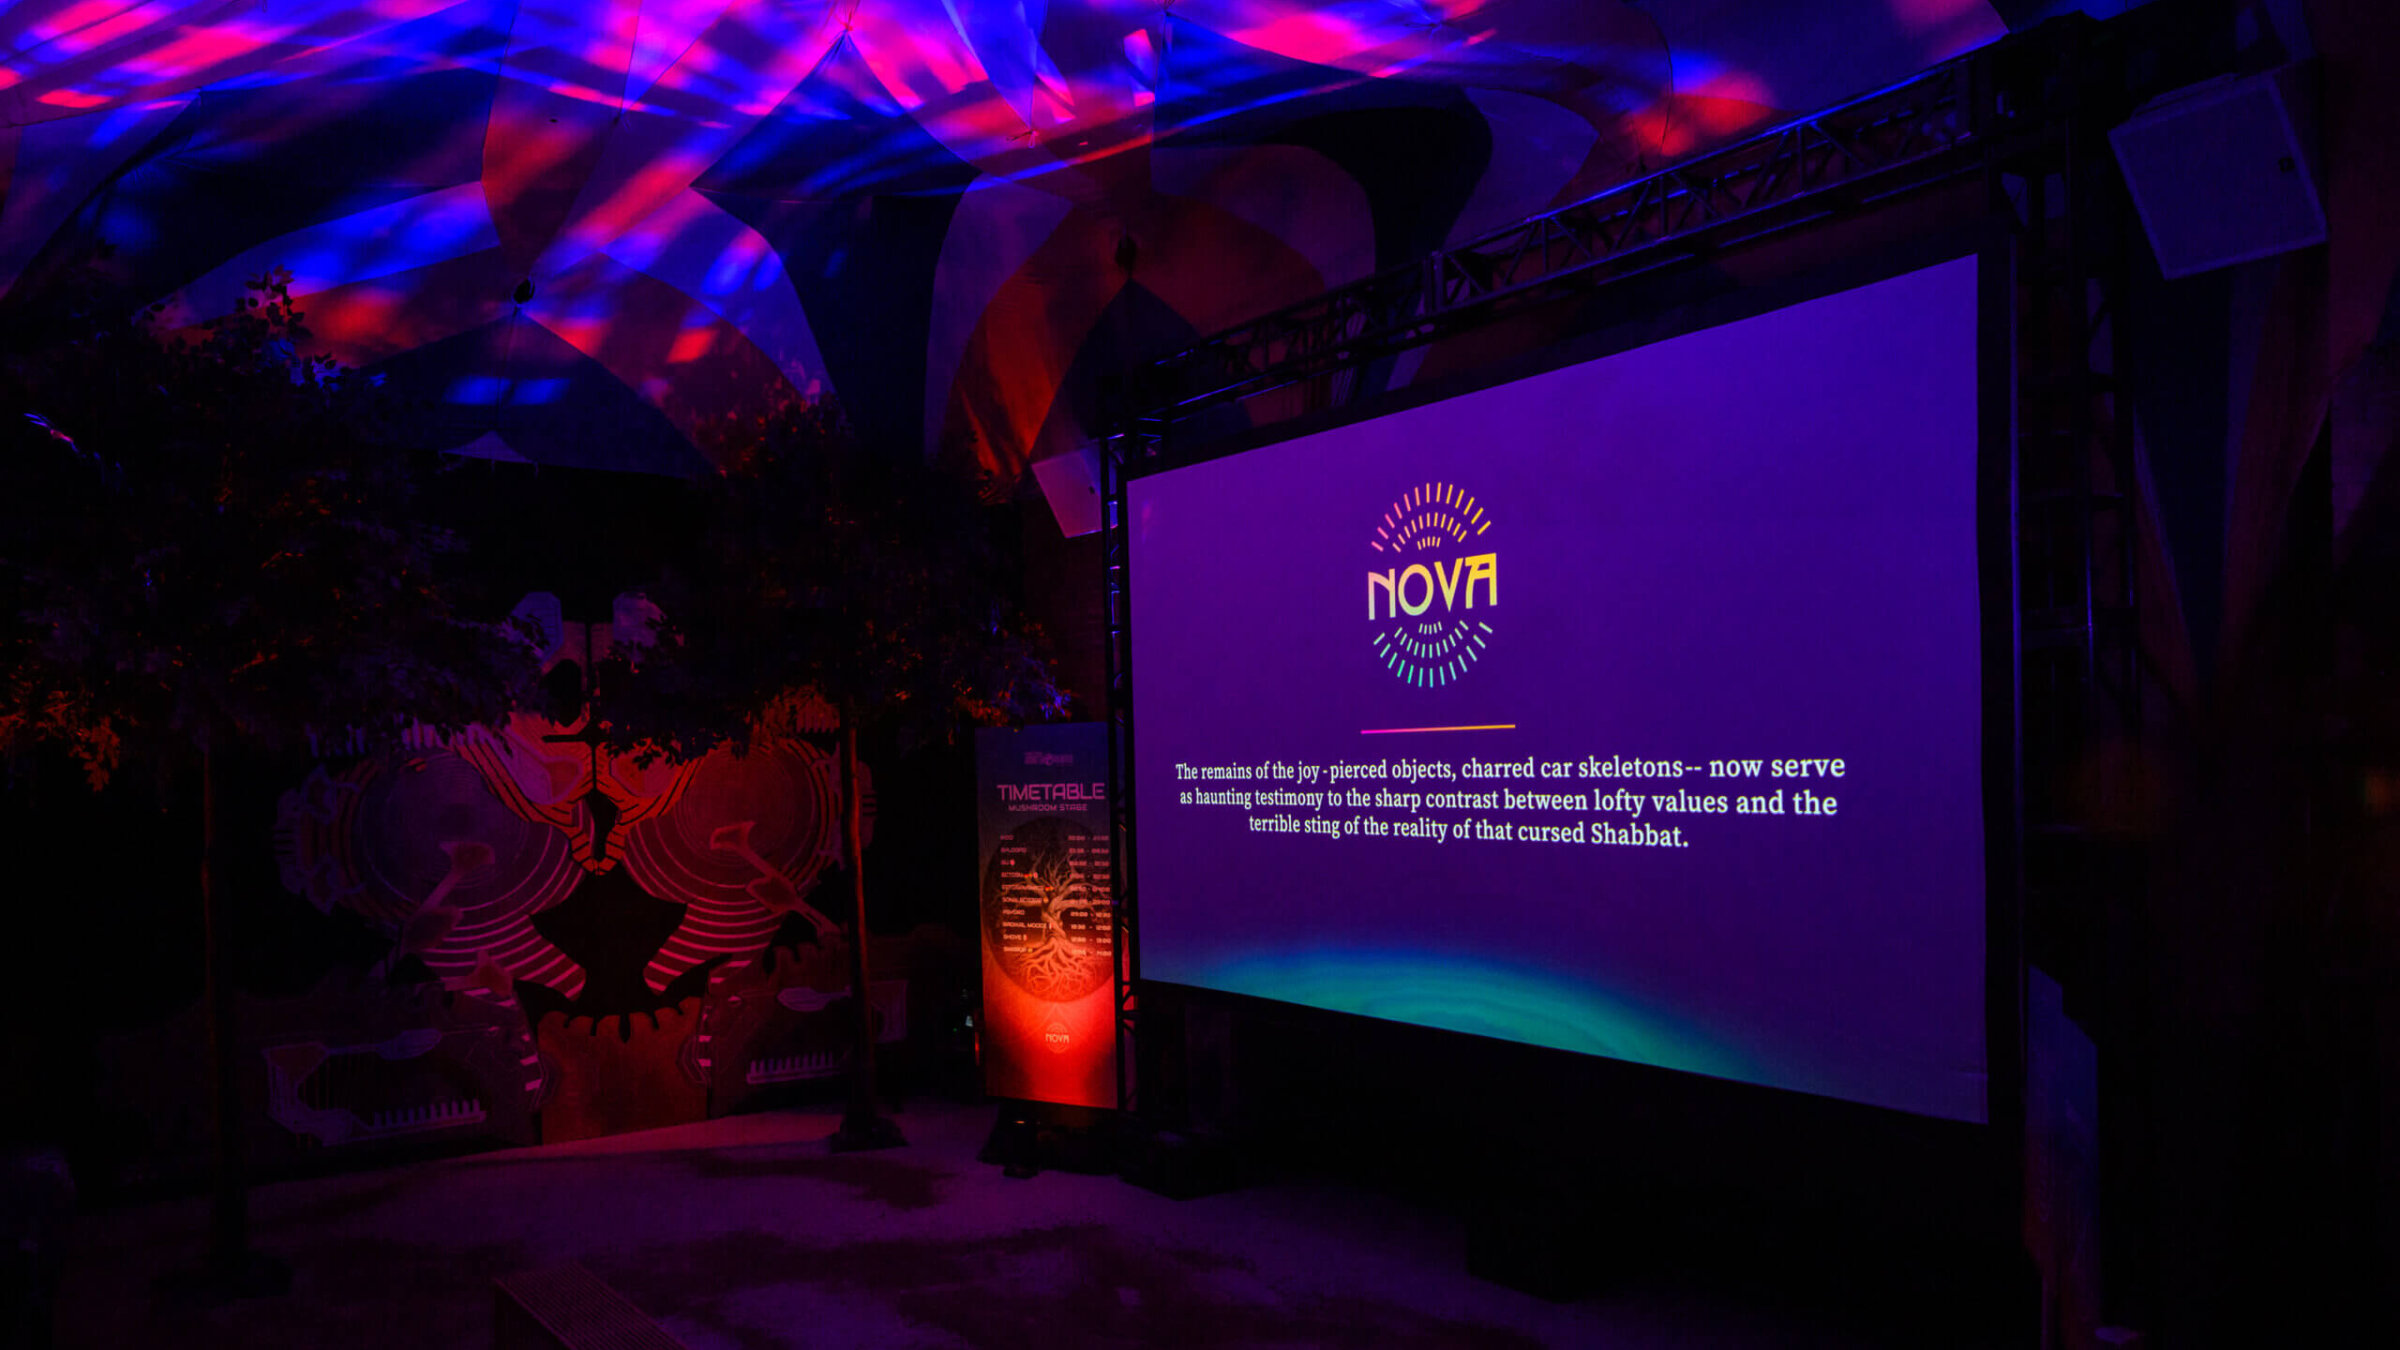 A screen displays info about the Nova festival at <i>The Nova Music Festival Exhibition: October 7th 06:29 AM, The Moment Music Stood Still</i>.